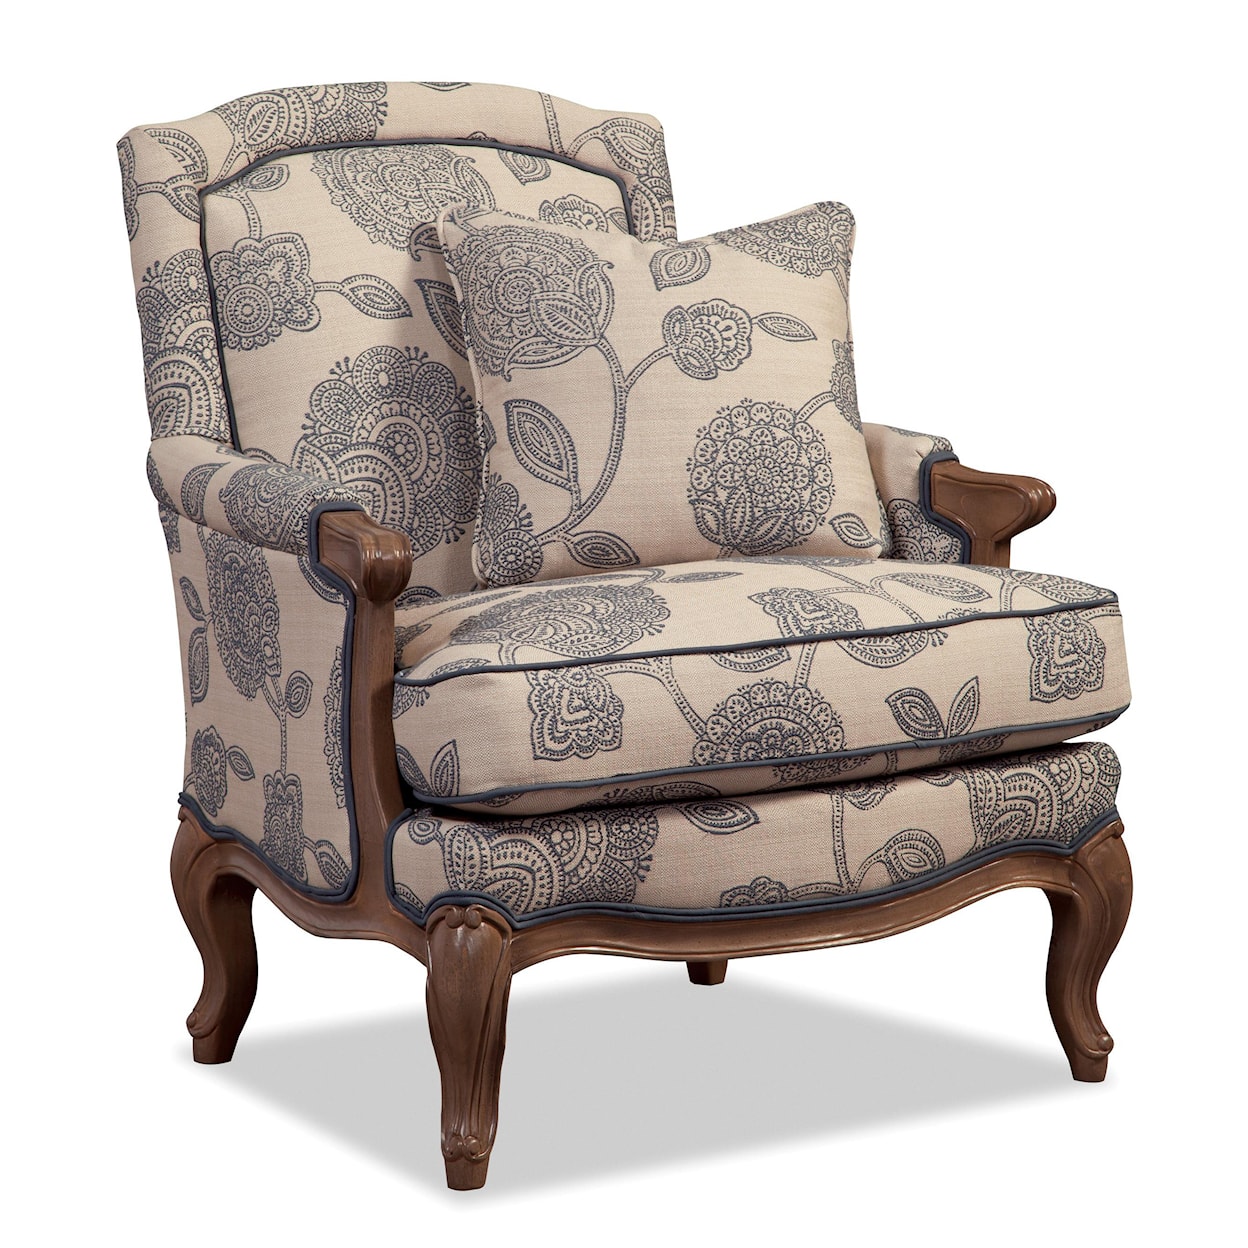 PD Cottage by Craftmaster Upholstered Chairs Chair